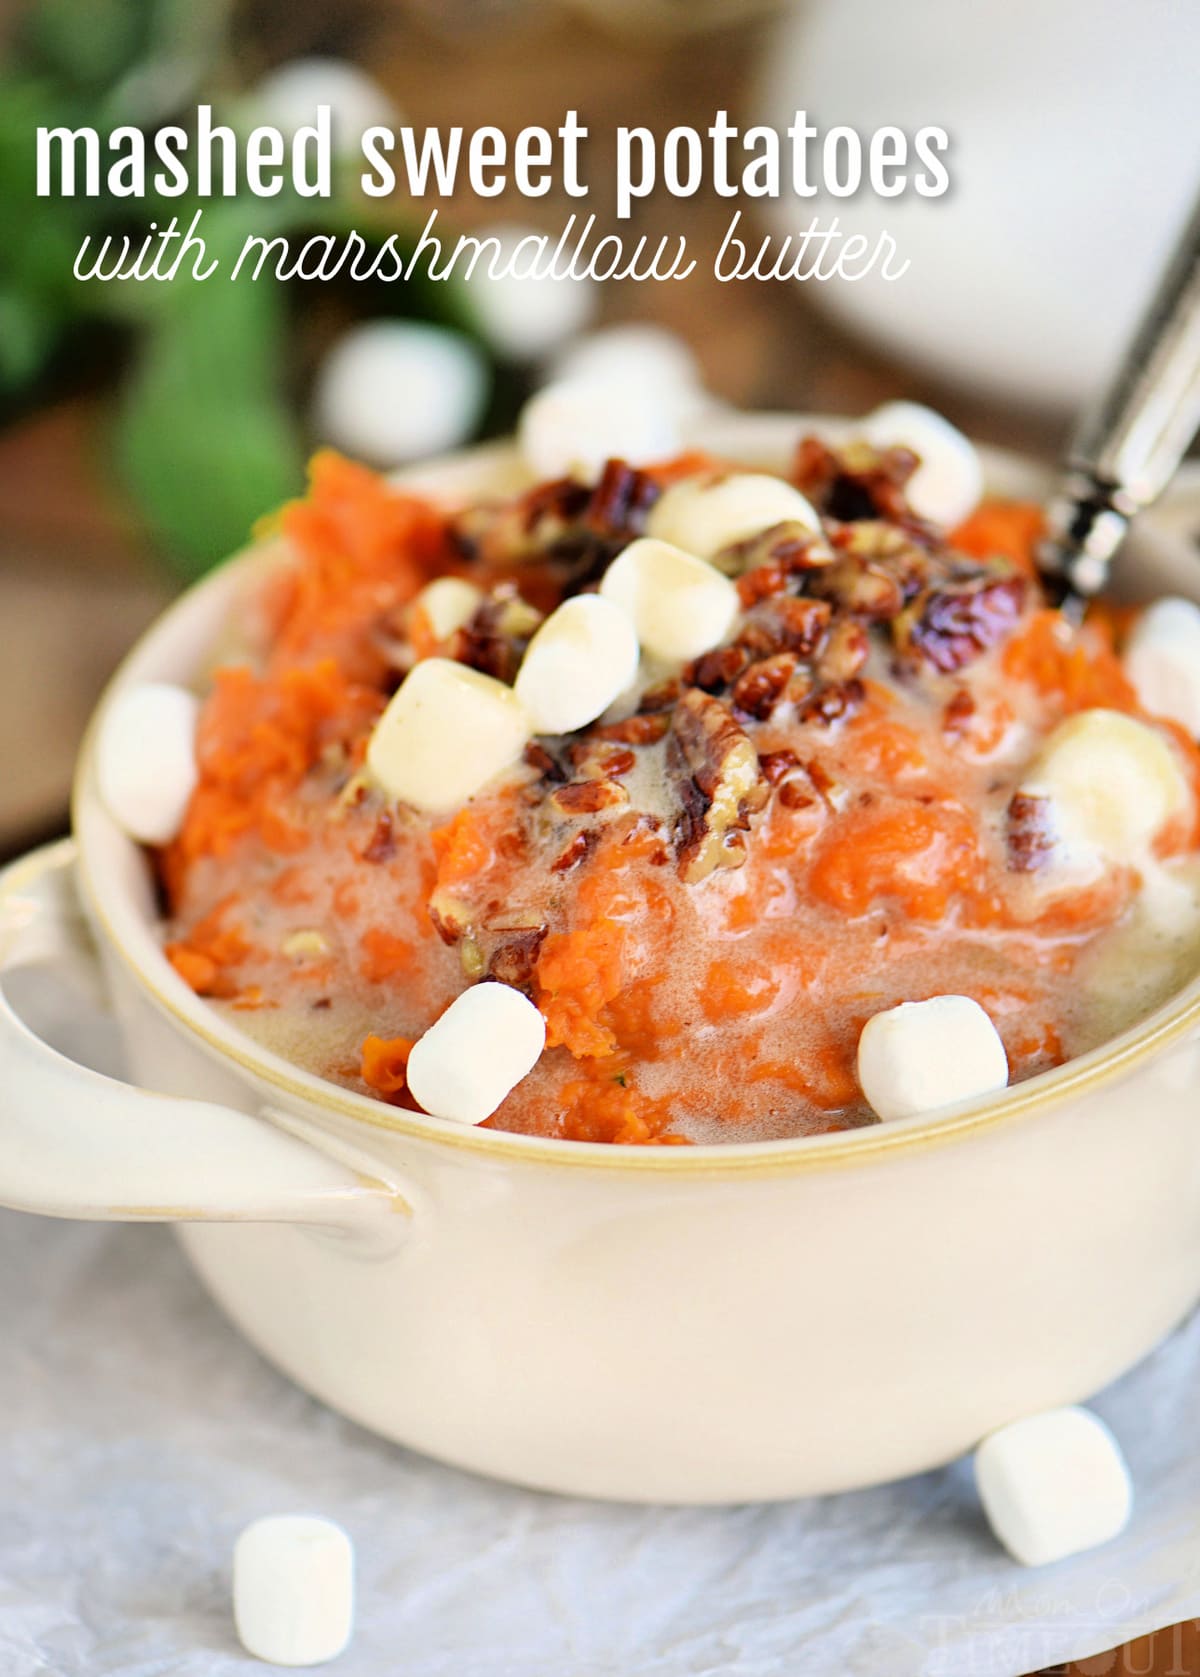 mashed sweet potatoes topped with marshmallows and pecans in beige bowl with text overlay at top of image